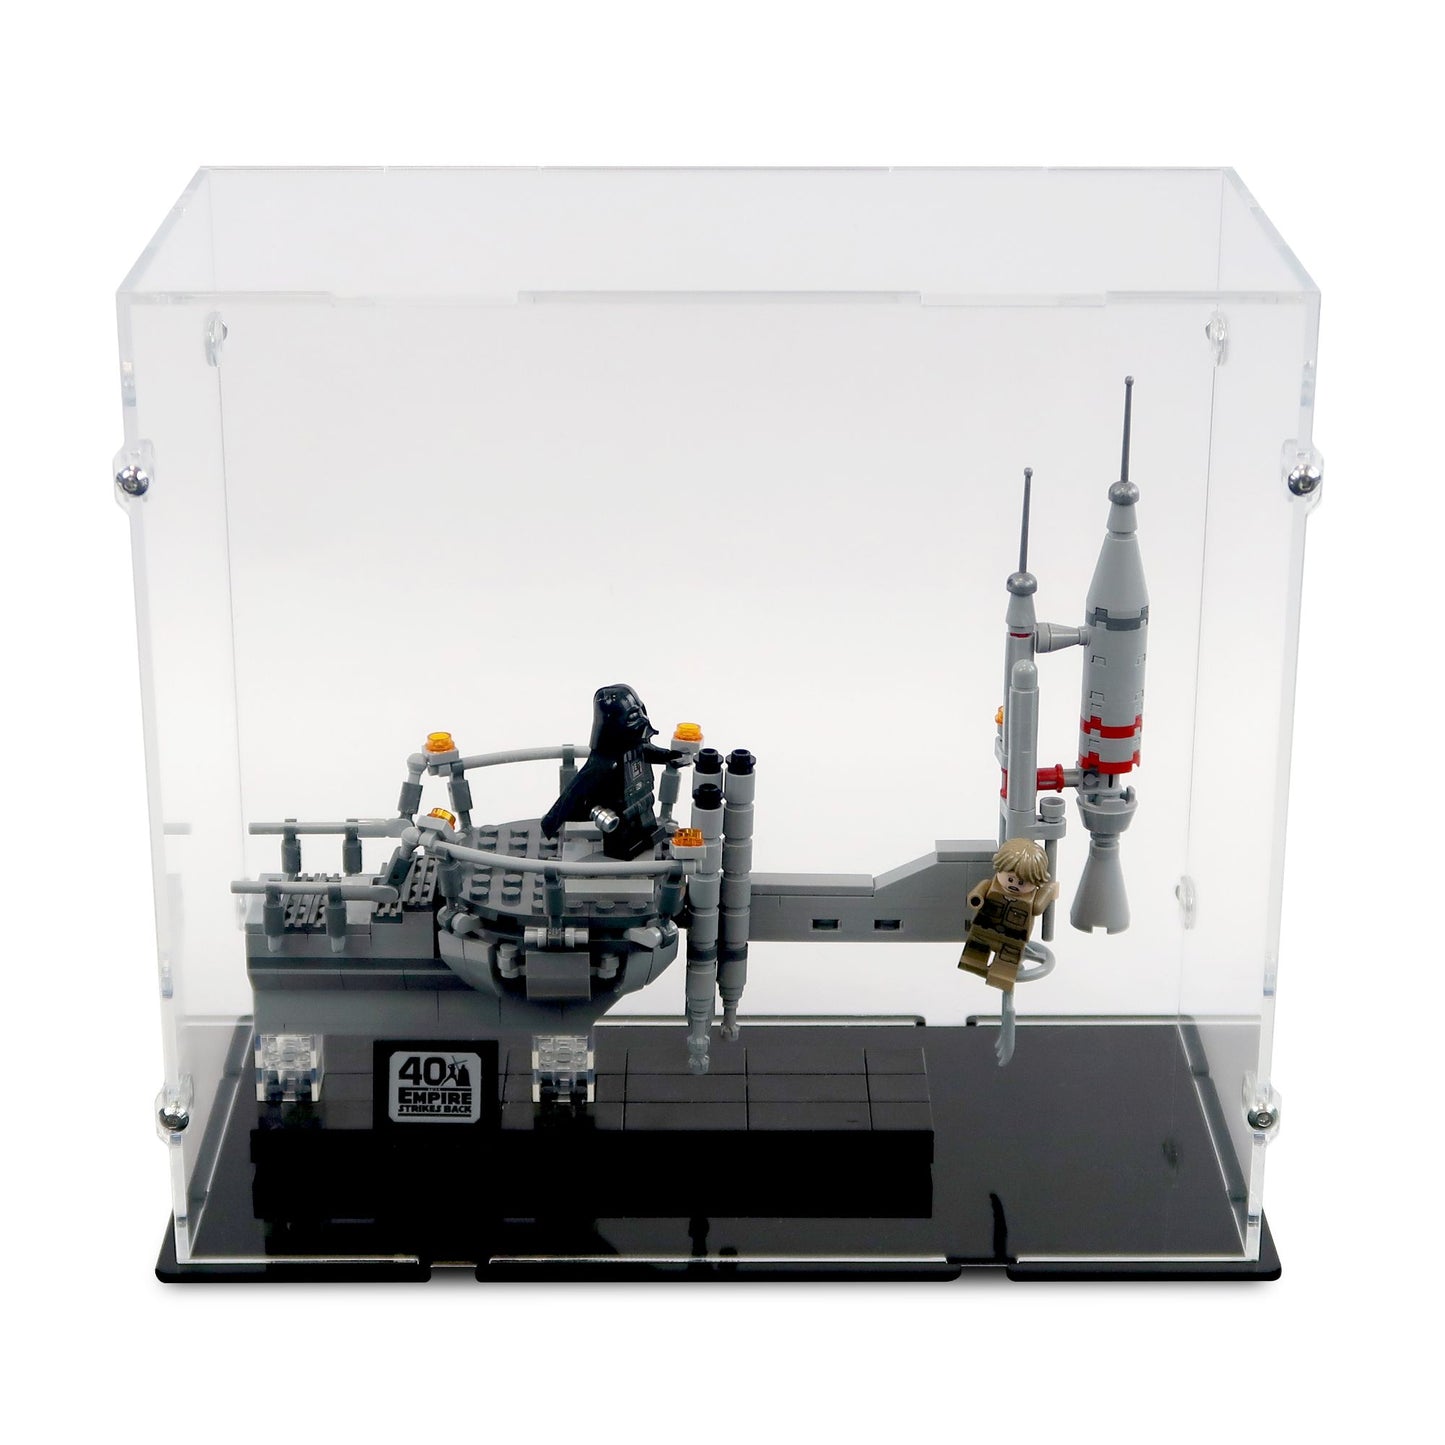 75294 Bespin Duel Display Case